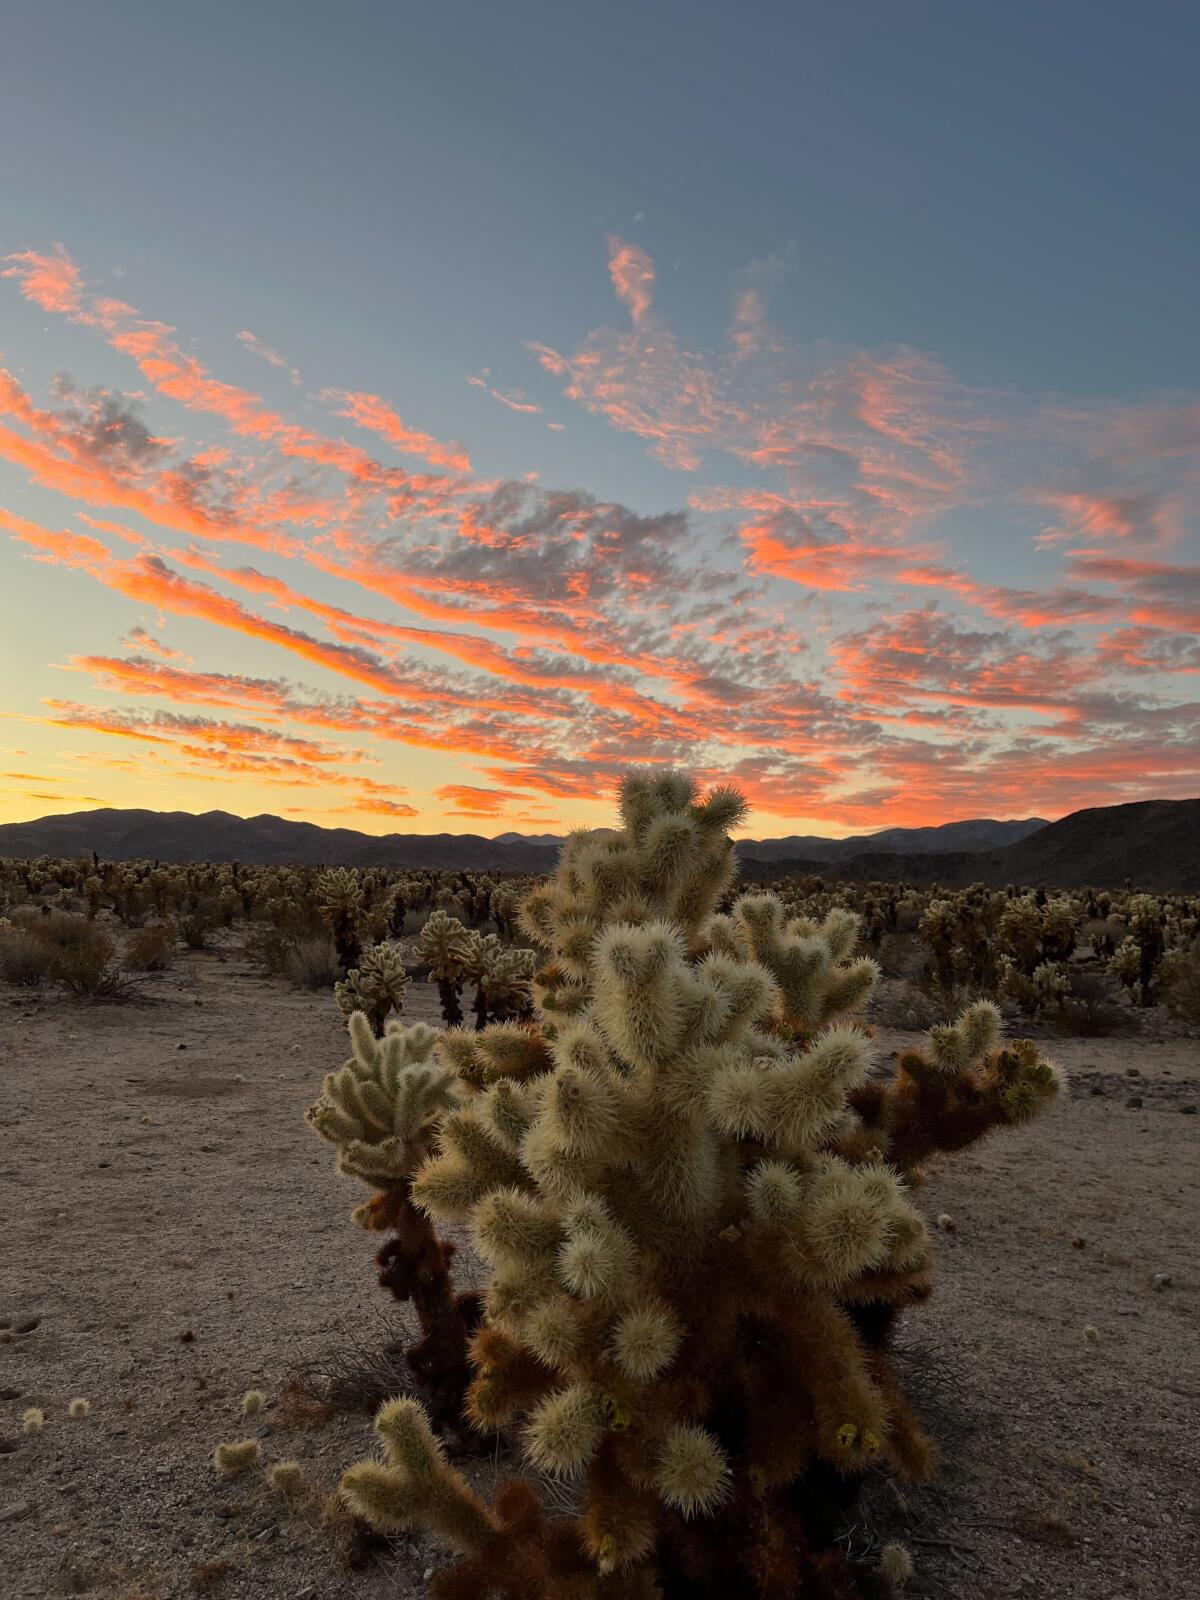 Cholla Cactus Garden in Joshua Tree National Park during an August sunset.